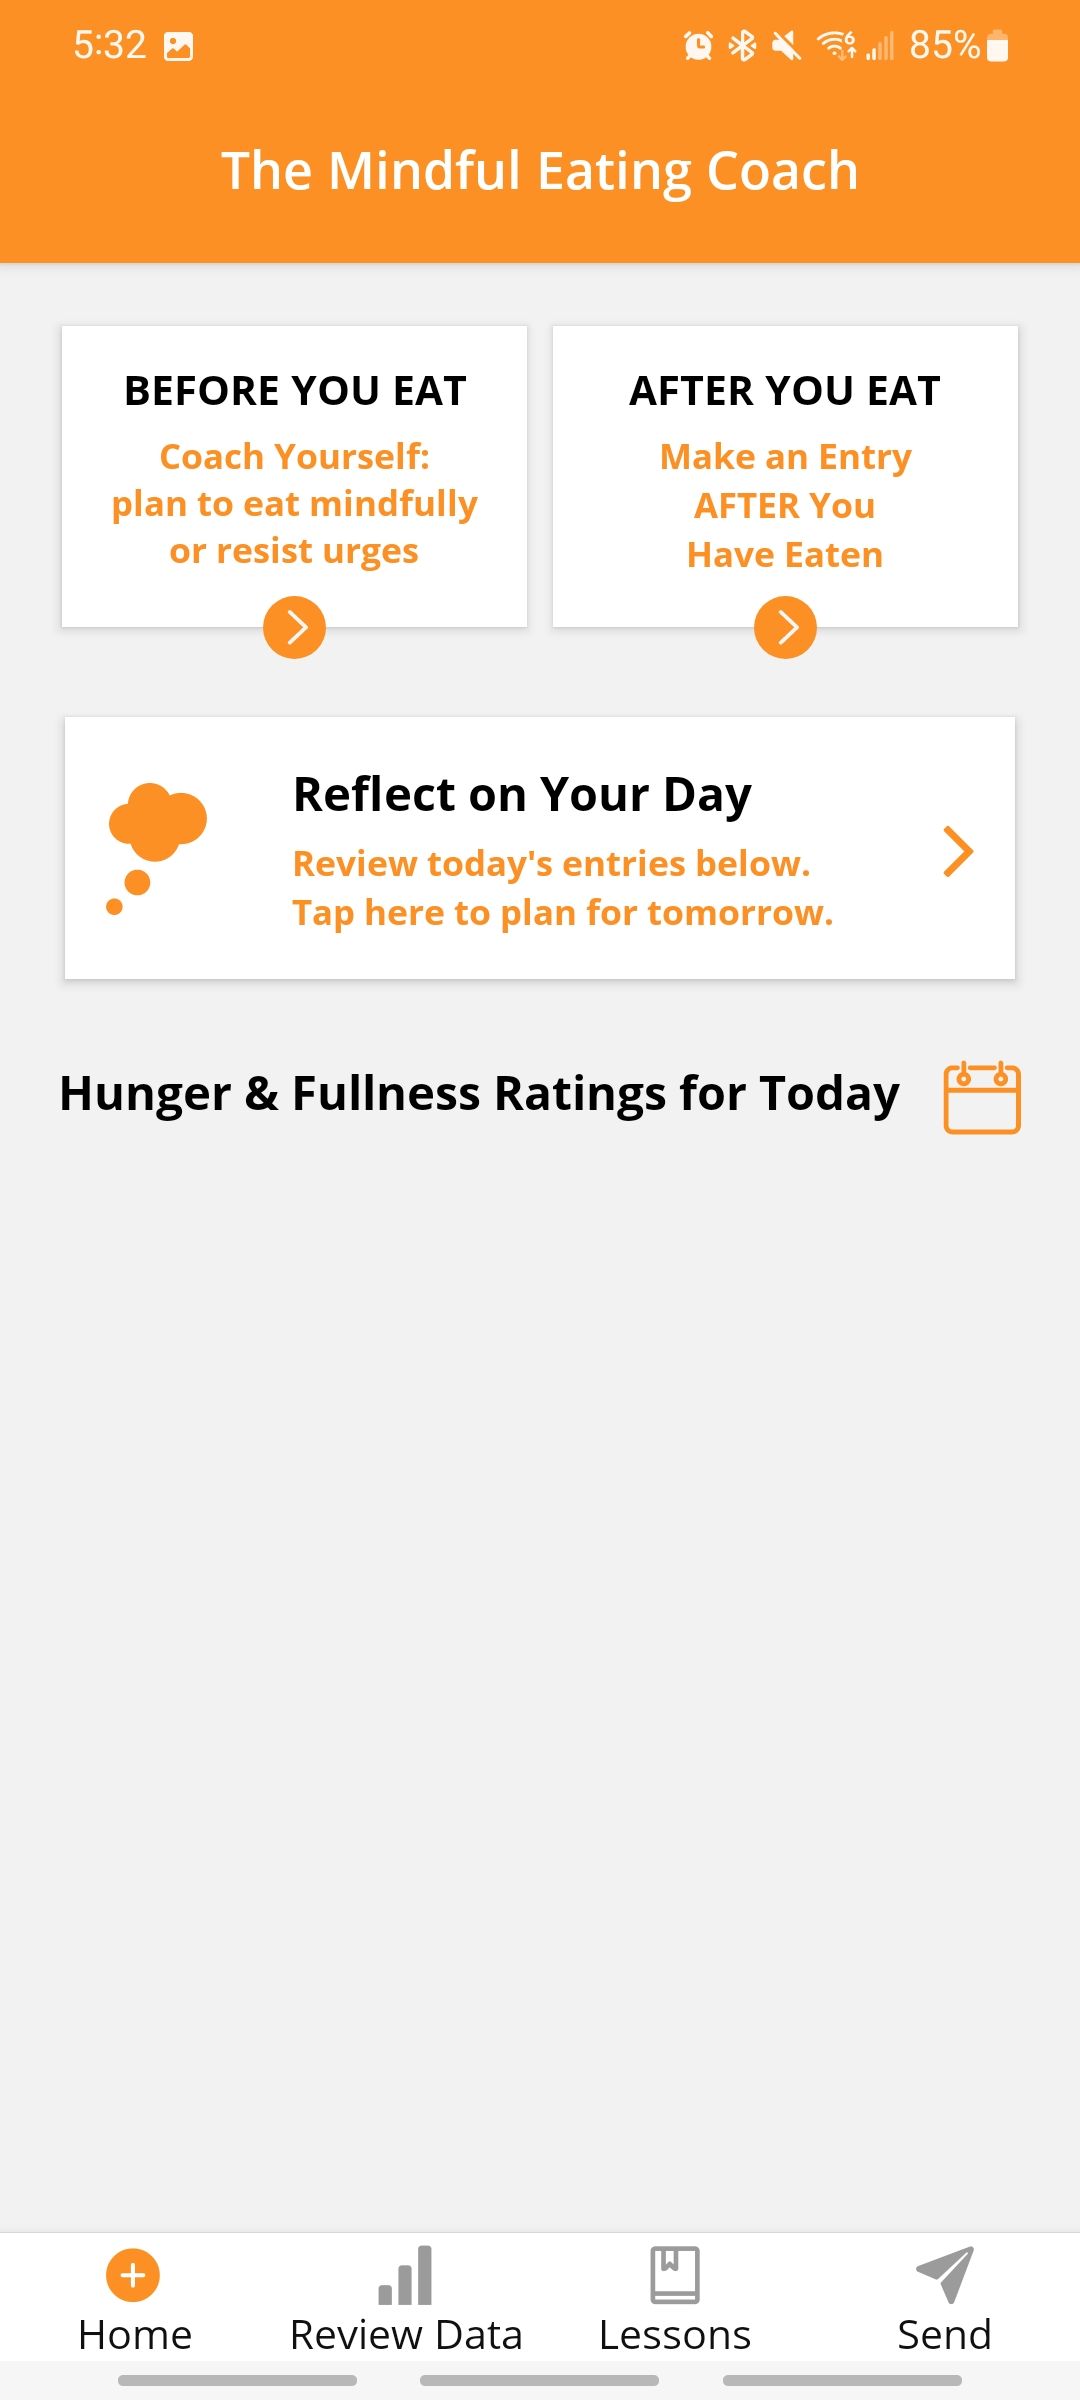 4 Mobile Apps to Practice Mindful Eating